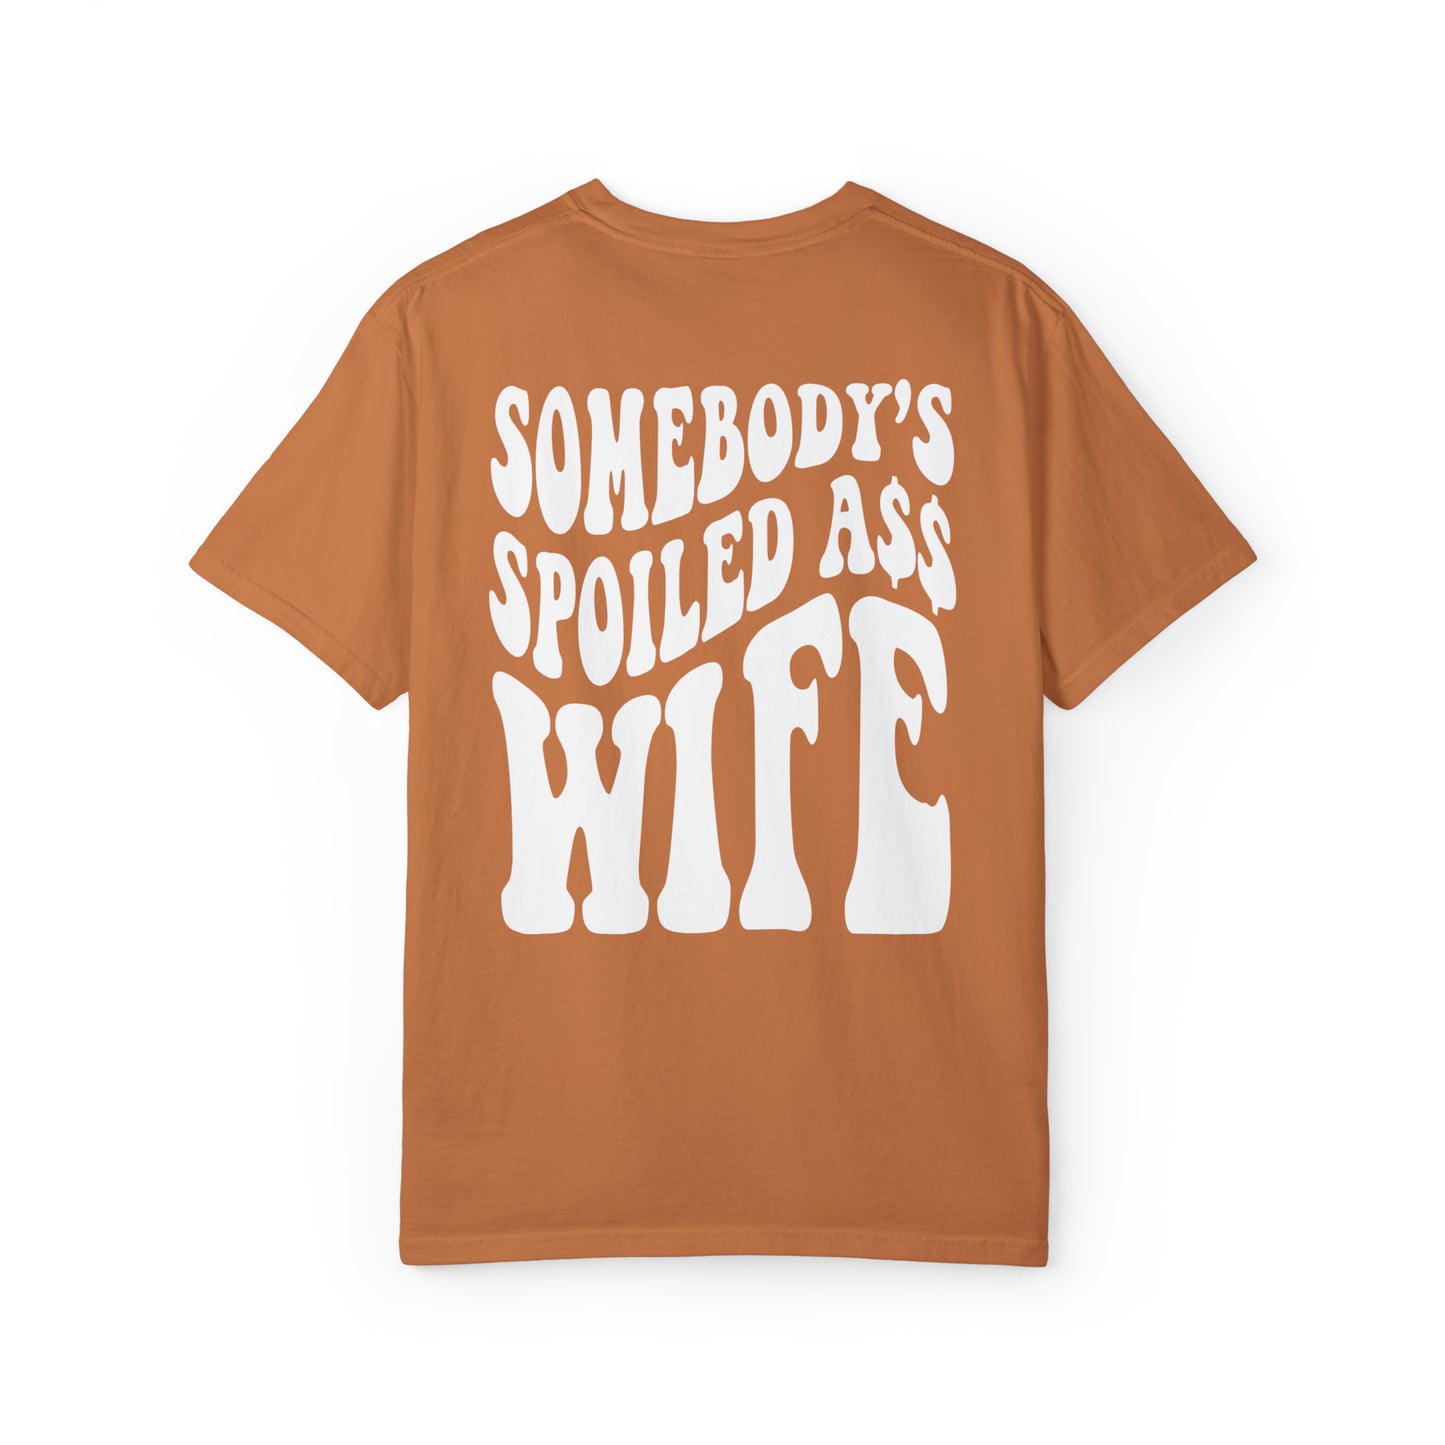 Somebody's Spoiled Ass Wife Tee